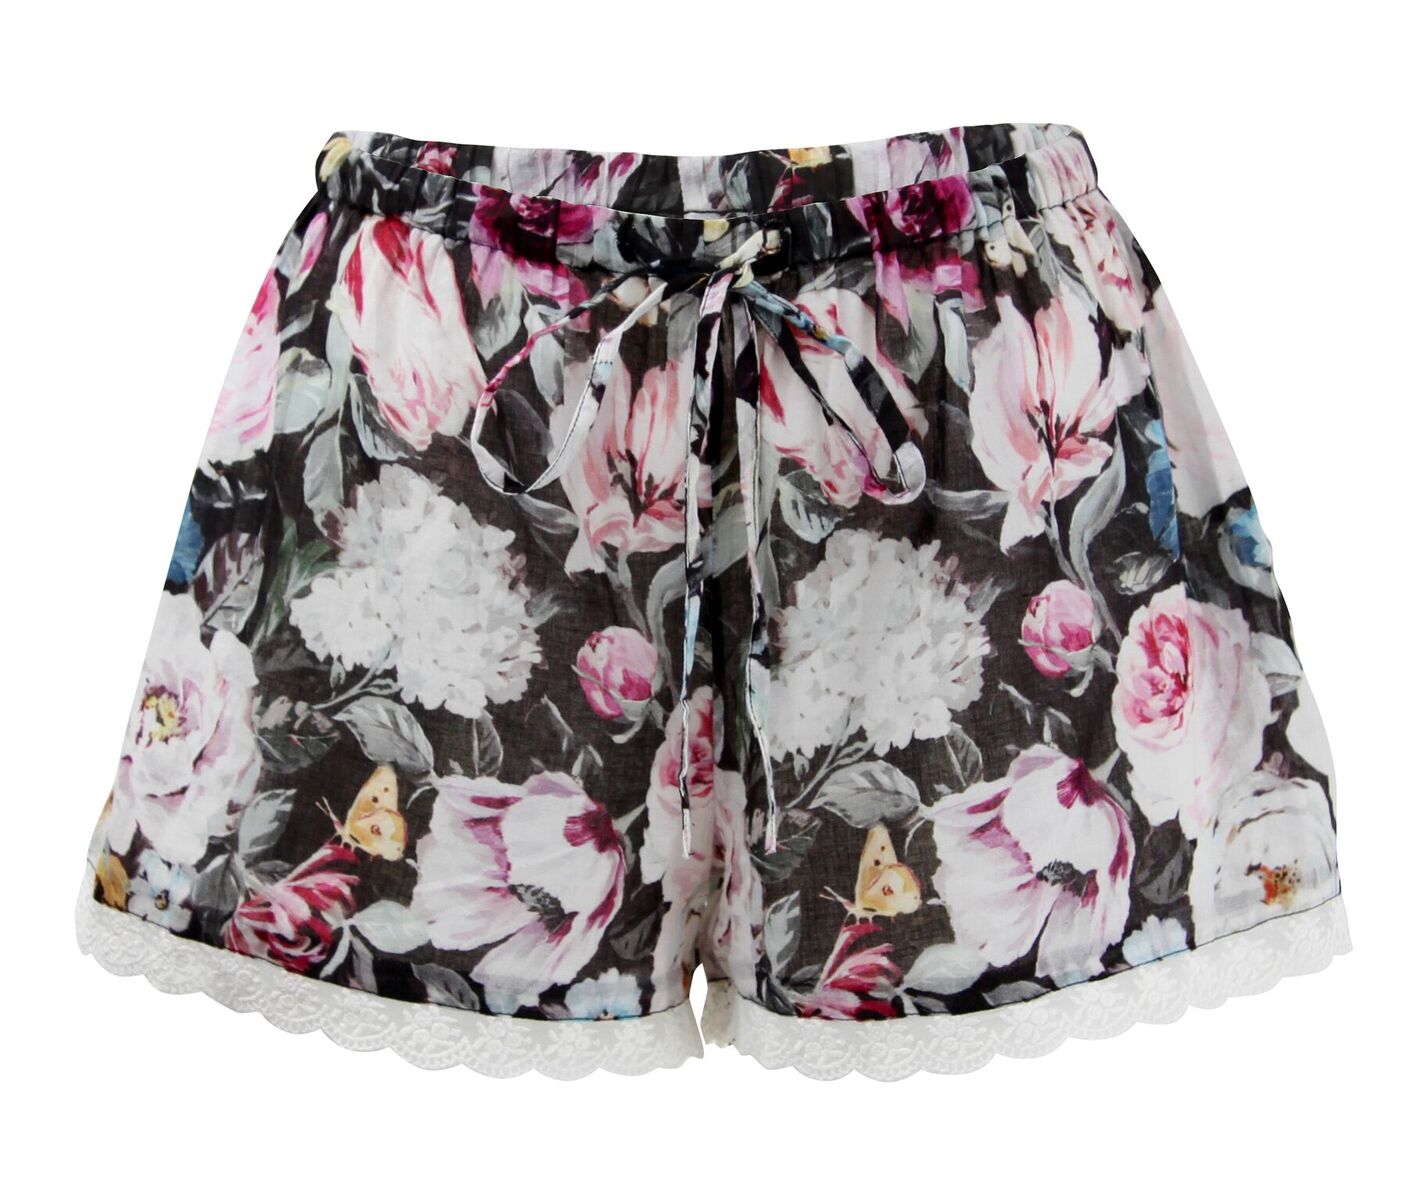 Wallace Cotton Flowerbed Sleep Short Floral $39.90